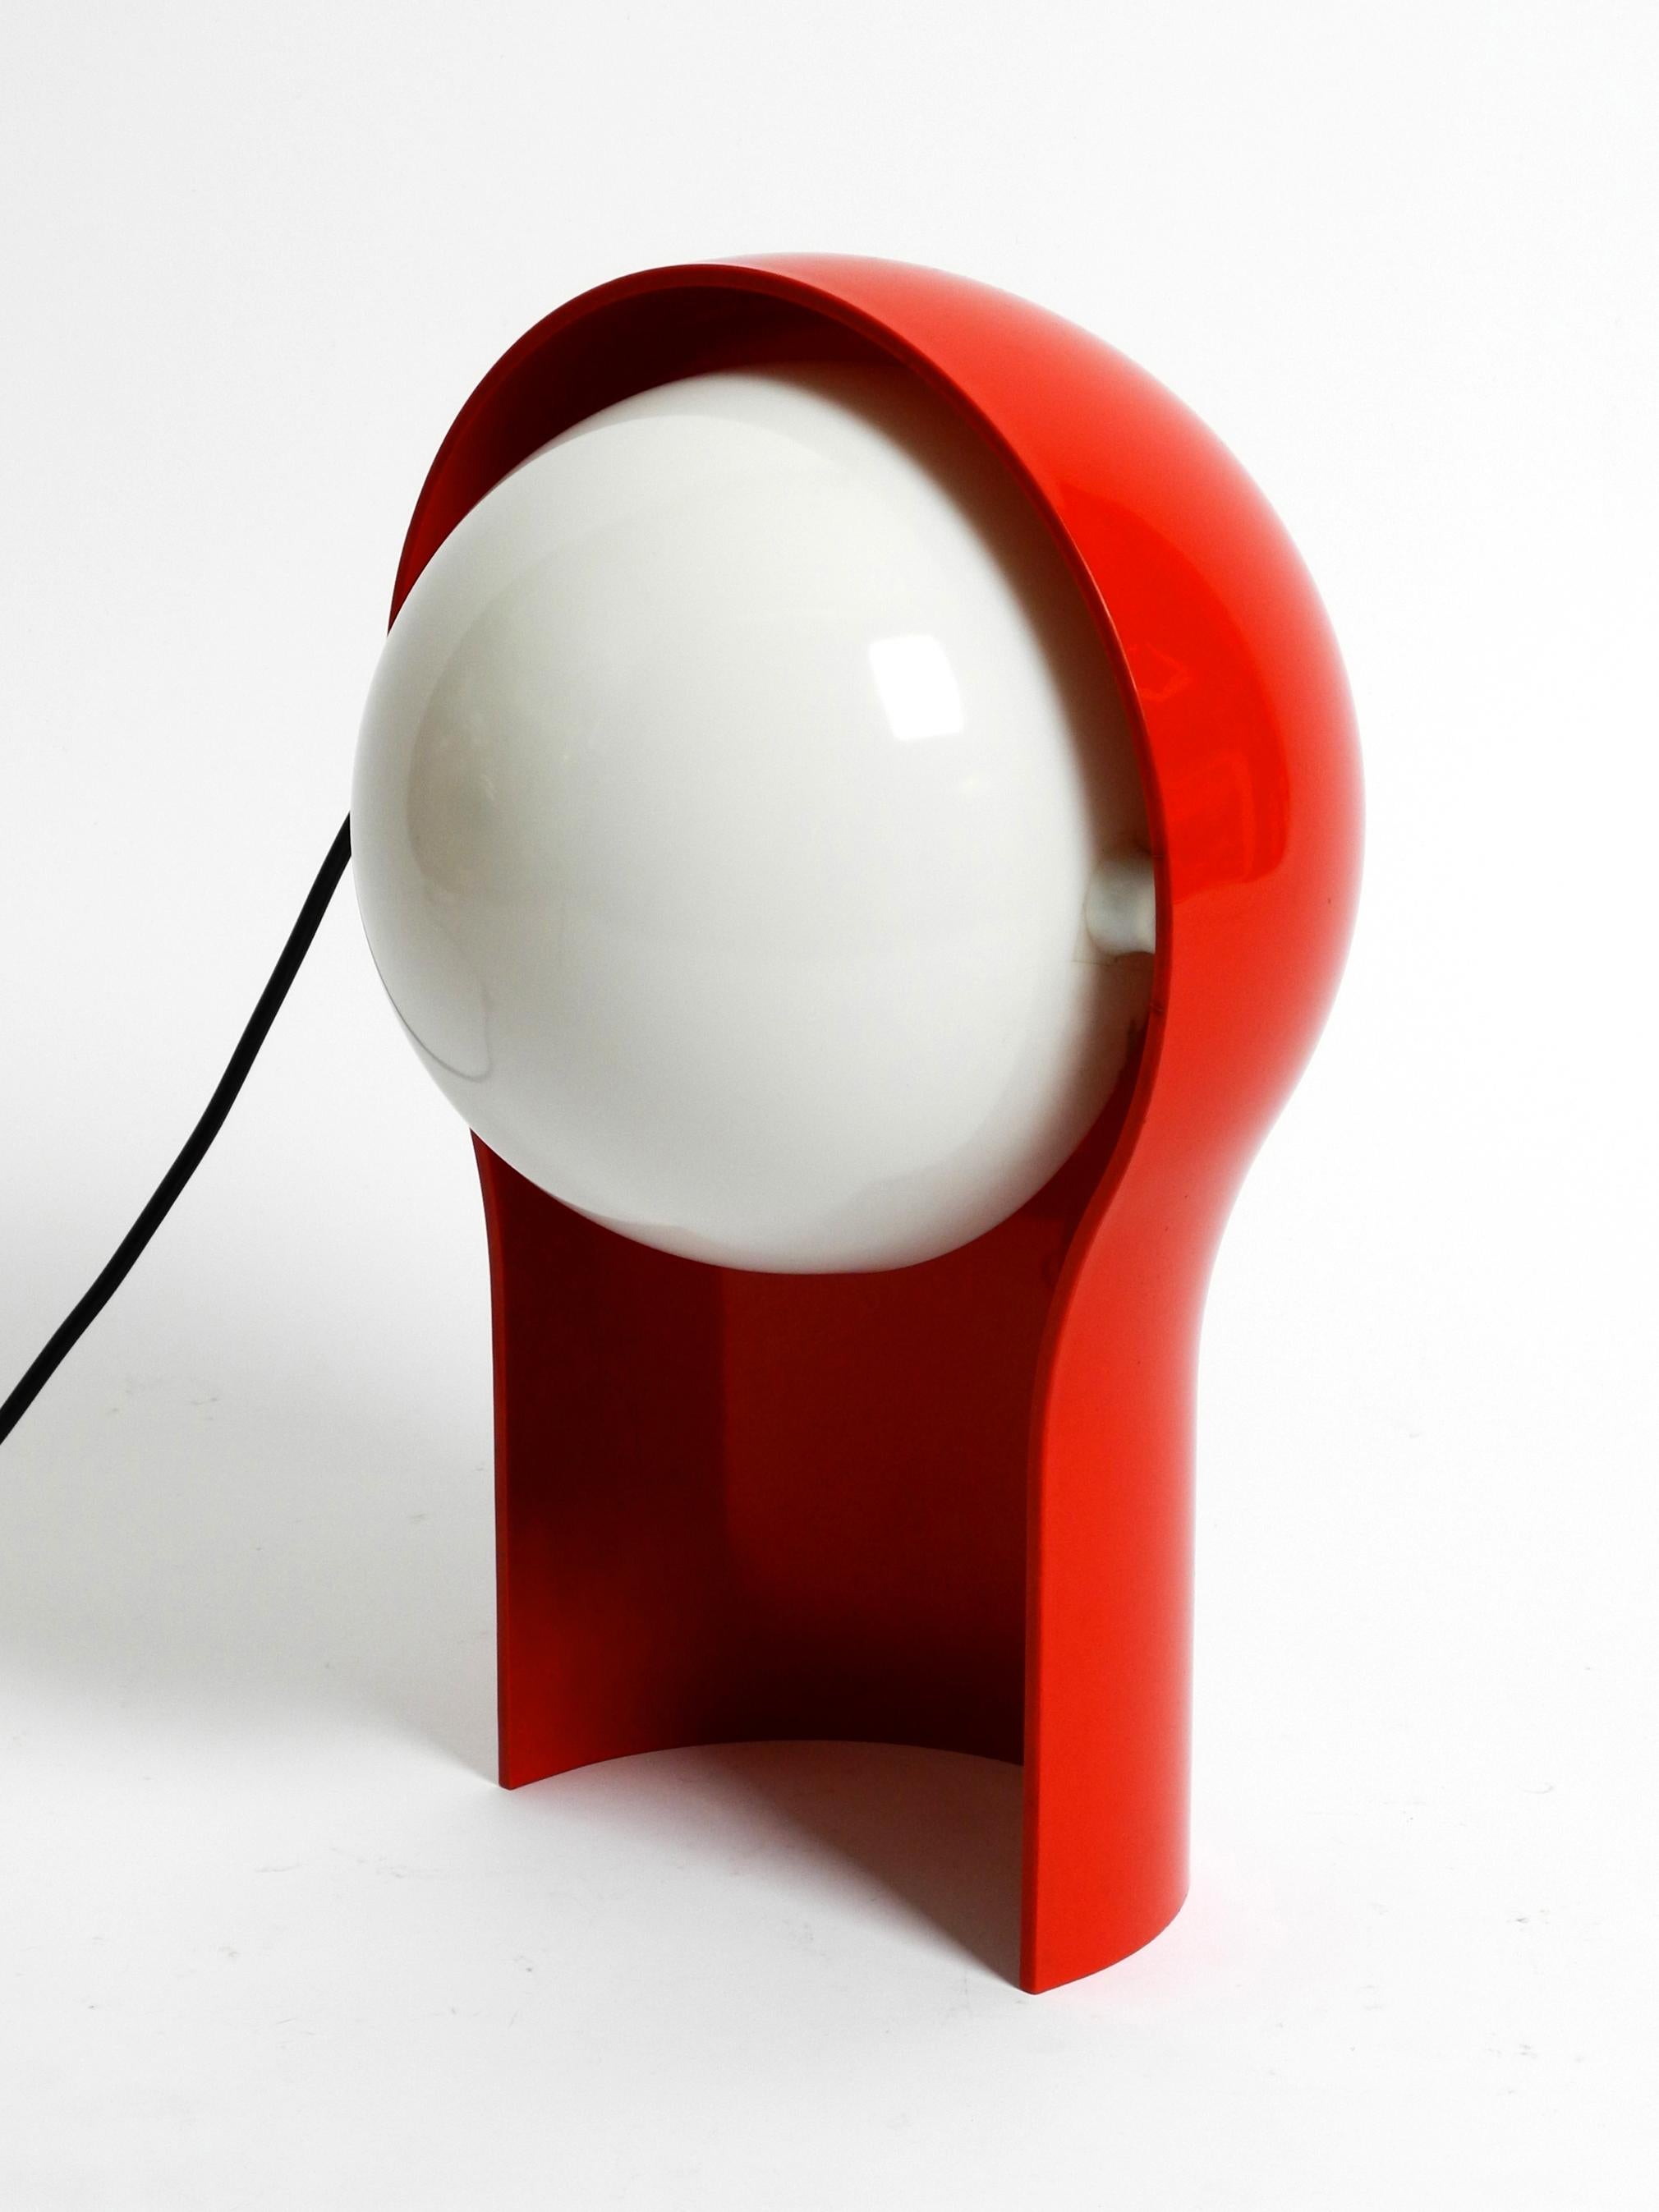 Telegono Table Lamp by Vico Magistretti for Artemide 1968 in Very Good Condition For Sale 6